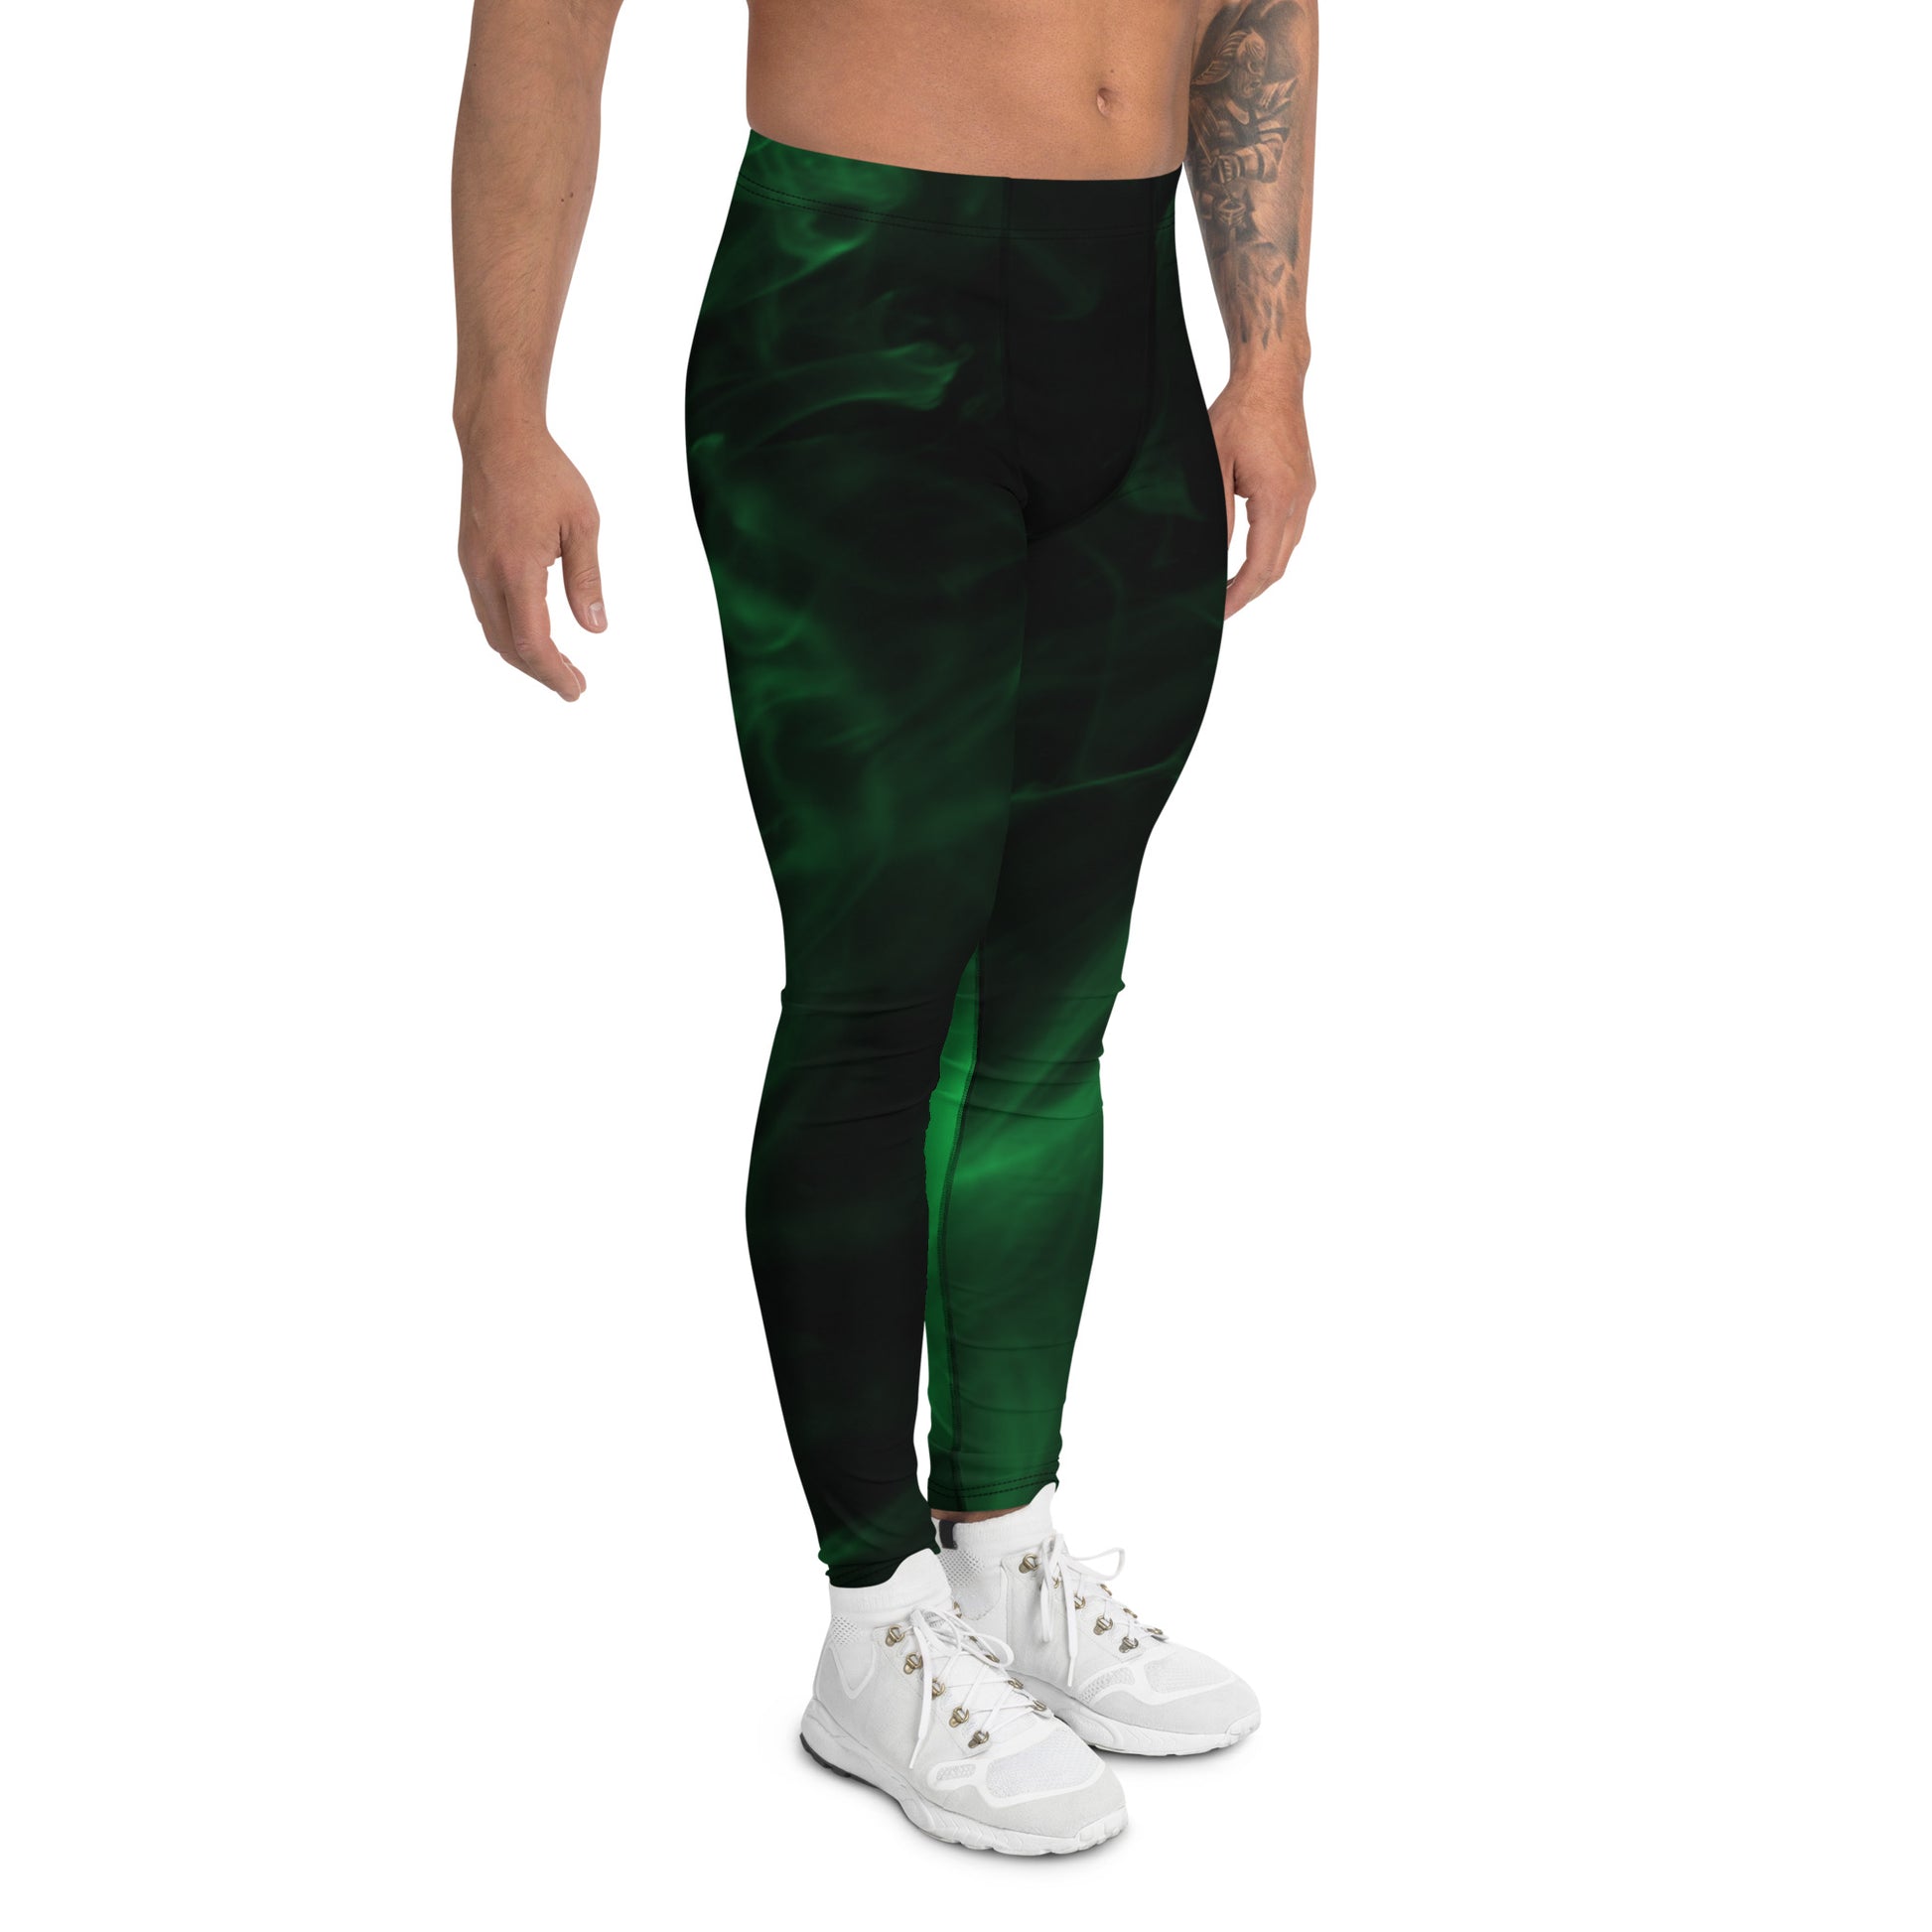 humble Sportswear, mens long leggings, all-over print gym activewear compression bottoms